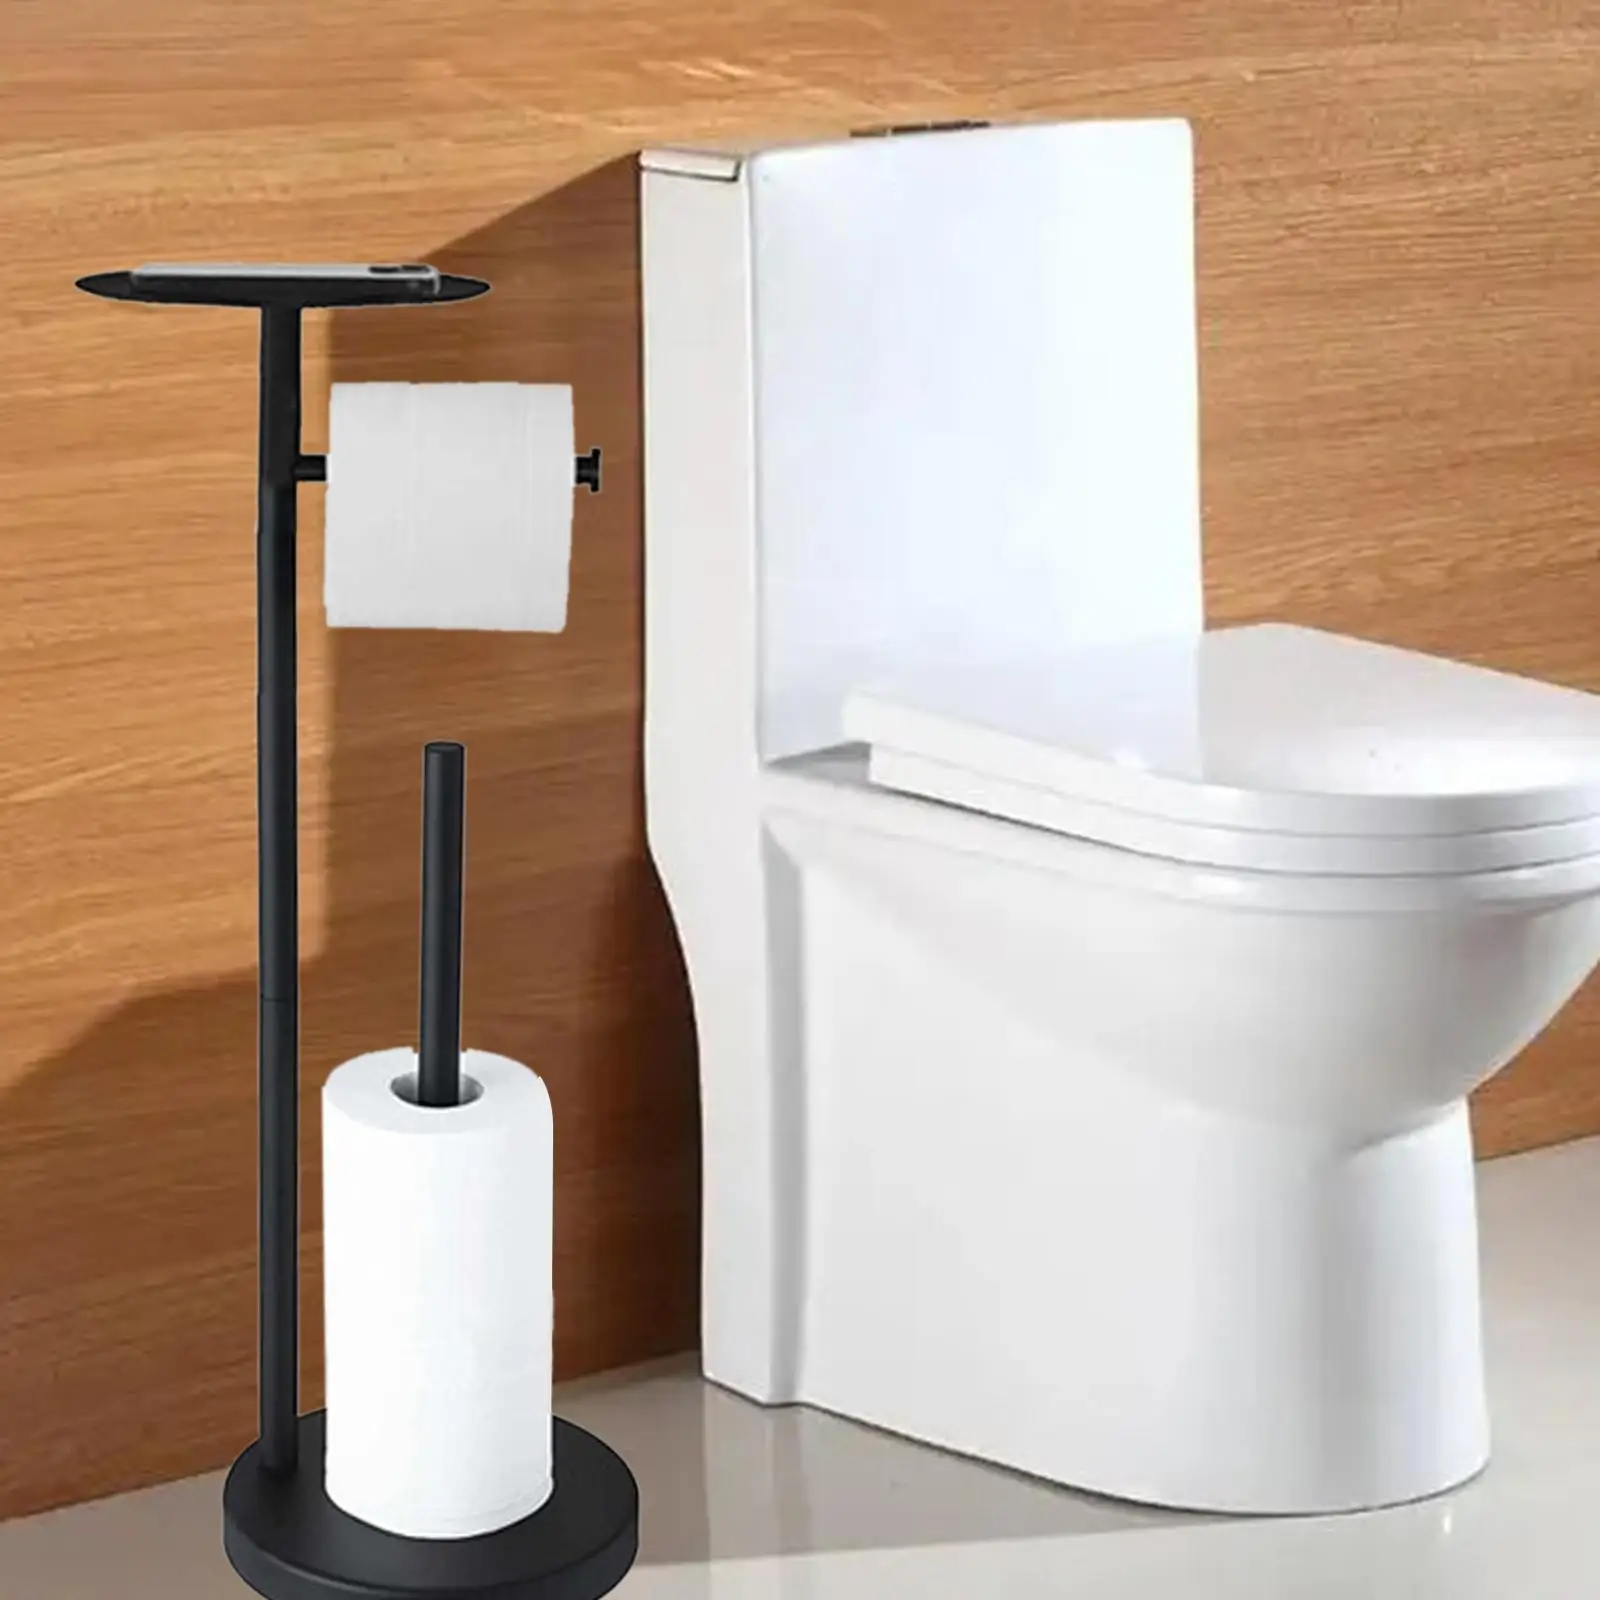 Toilet Roll Holder Stand Toilet Roll Holder with Shelf Reserve Portable